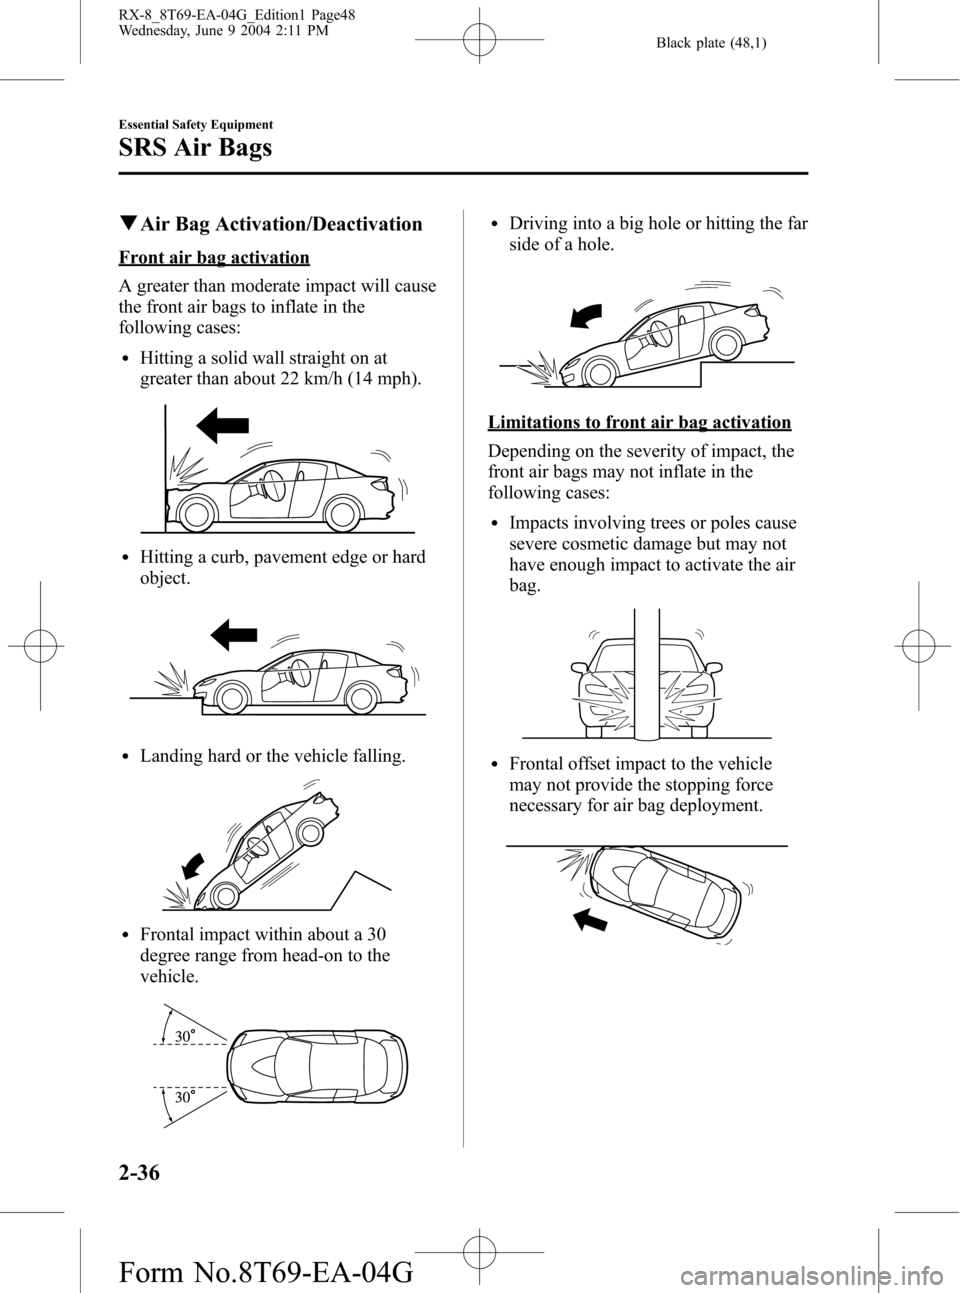 MAZDA MODEL RX 8 2005   (in English) Service Manual Black plate (48,1)
qAir Bag Activation/Deactivation
Front air bag activation
A greater than moderate impact will cause
the front air bags to inflate in the
following cases:
lHitting a solid wall strai